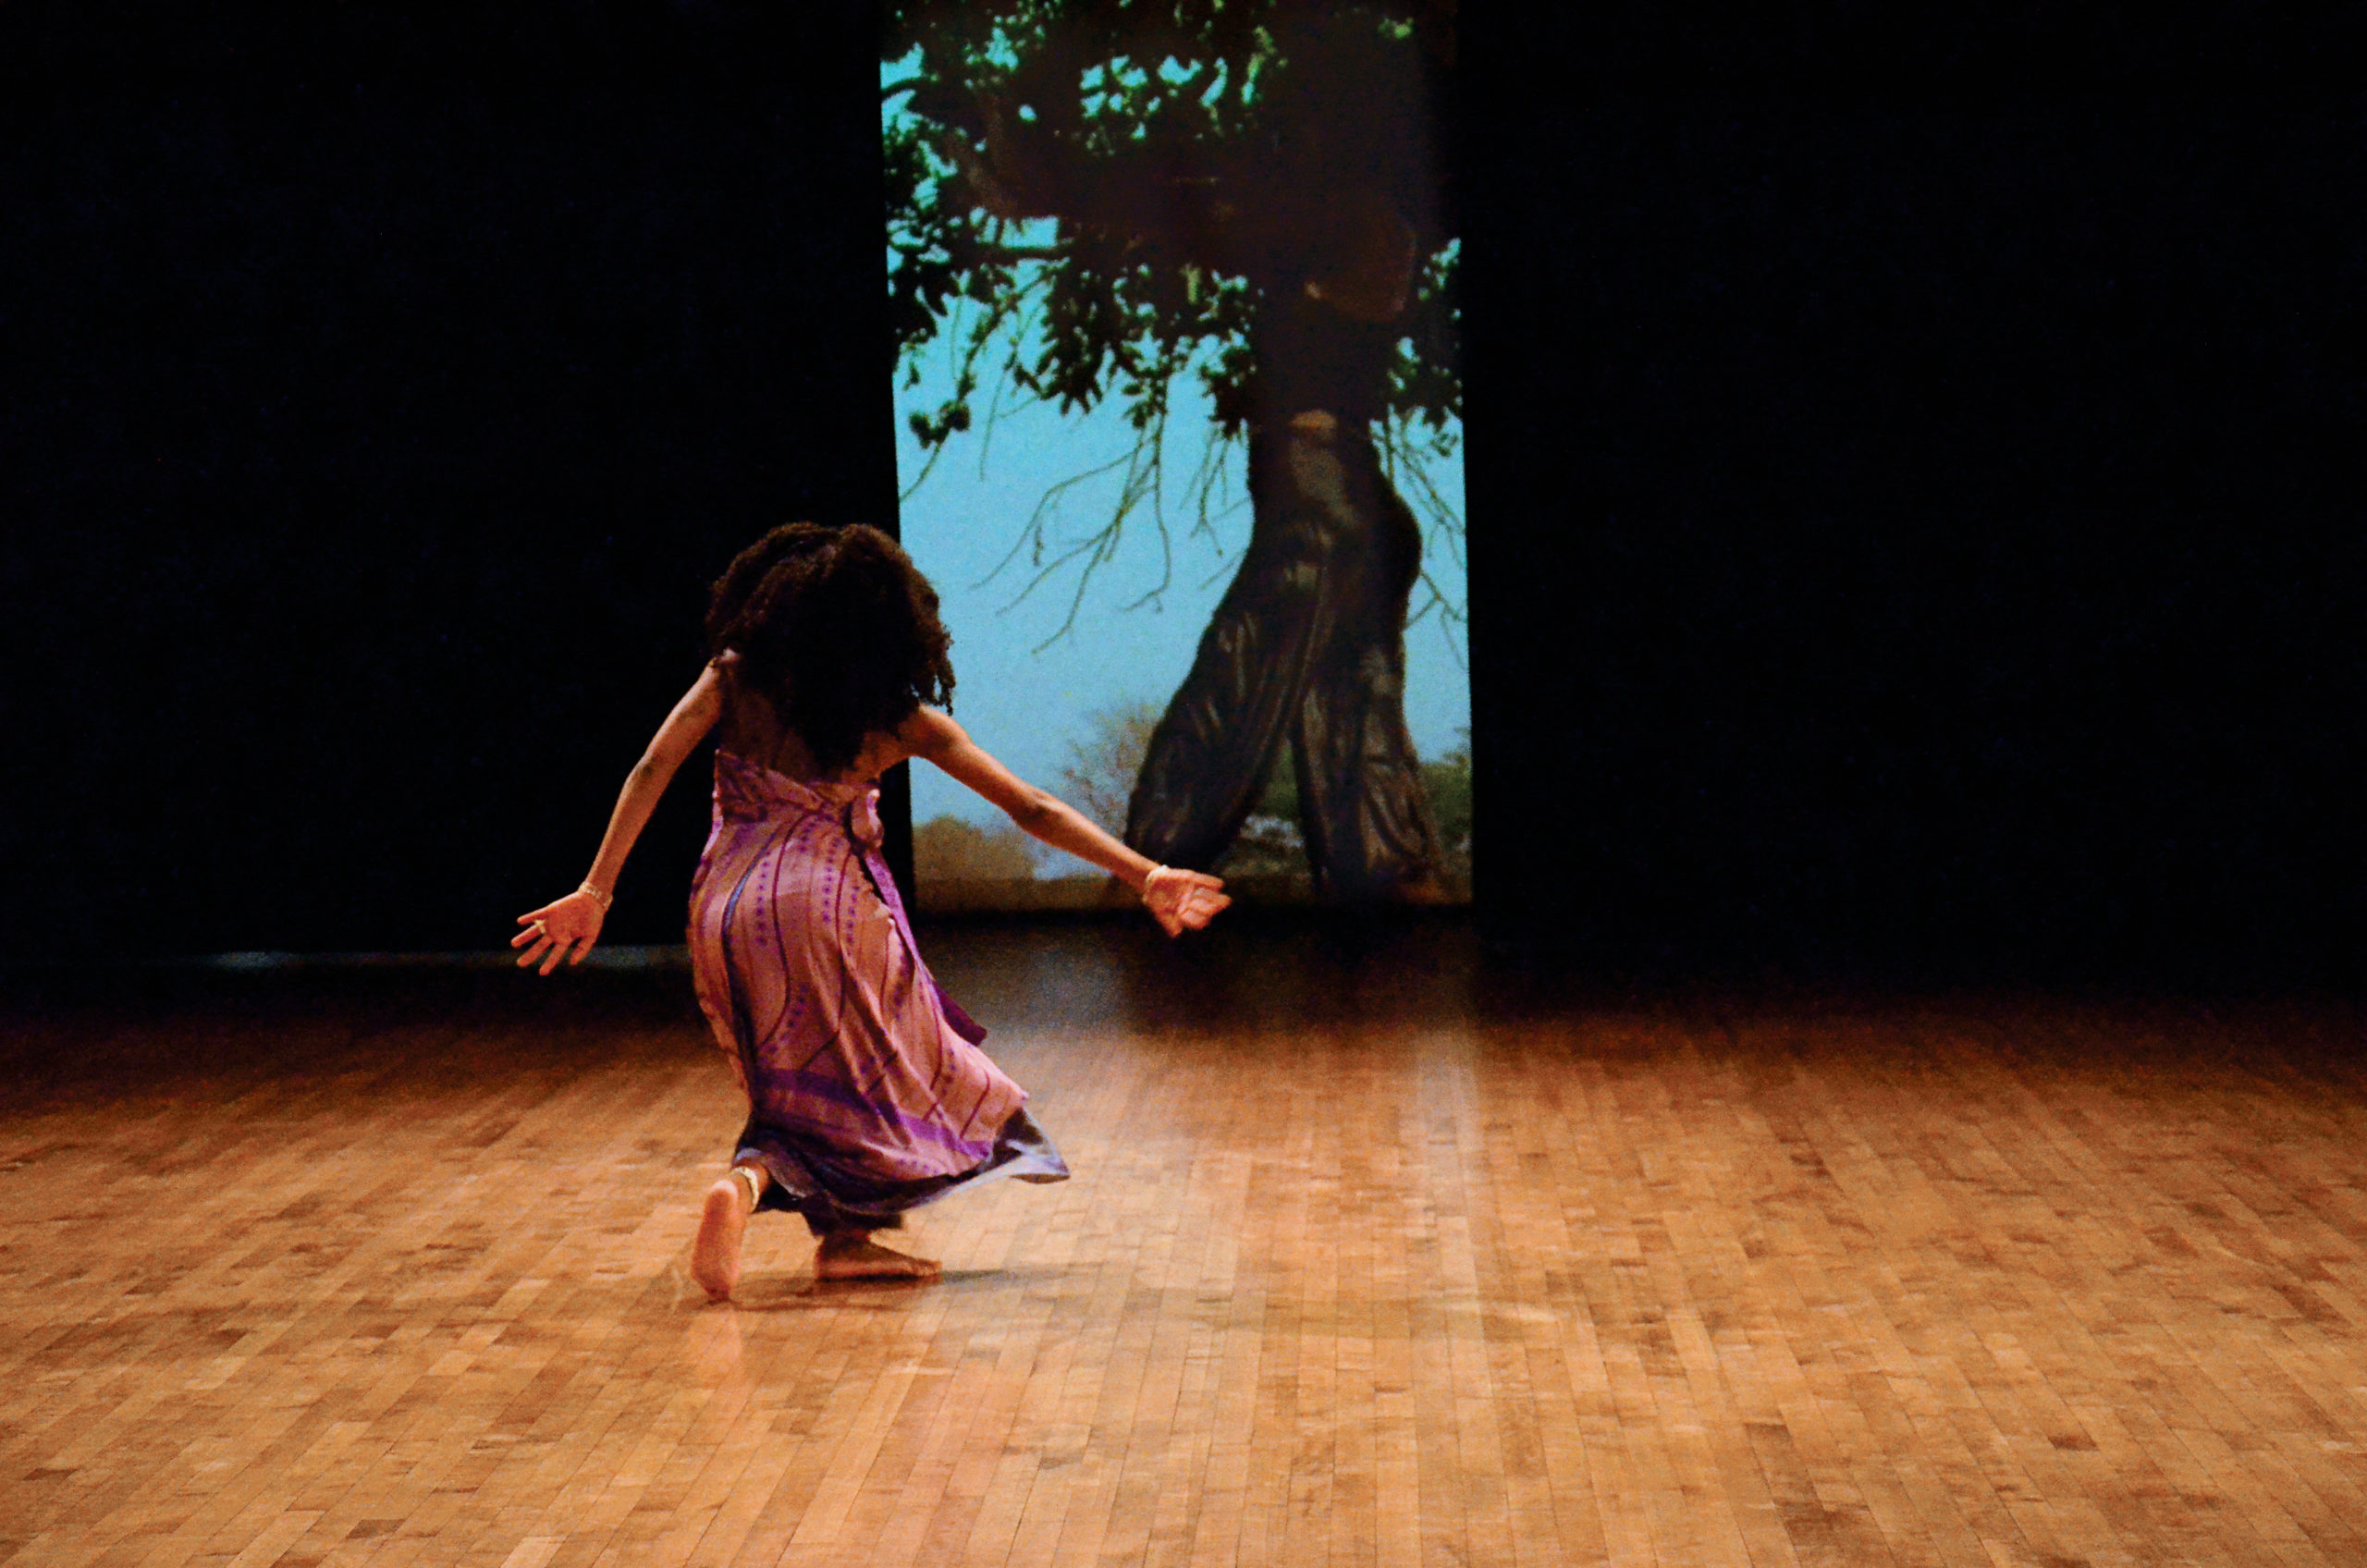 Nosizo Lukhele, a female figure with dark skin and long curly hair in a purple dress with some patterns, is in motion in her back style. On the back screen, a video of herself dancing under a tree is projected.